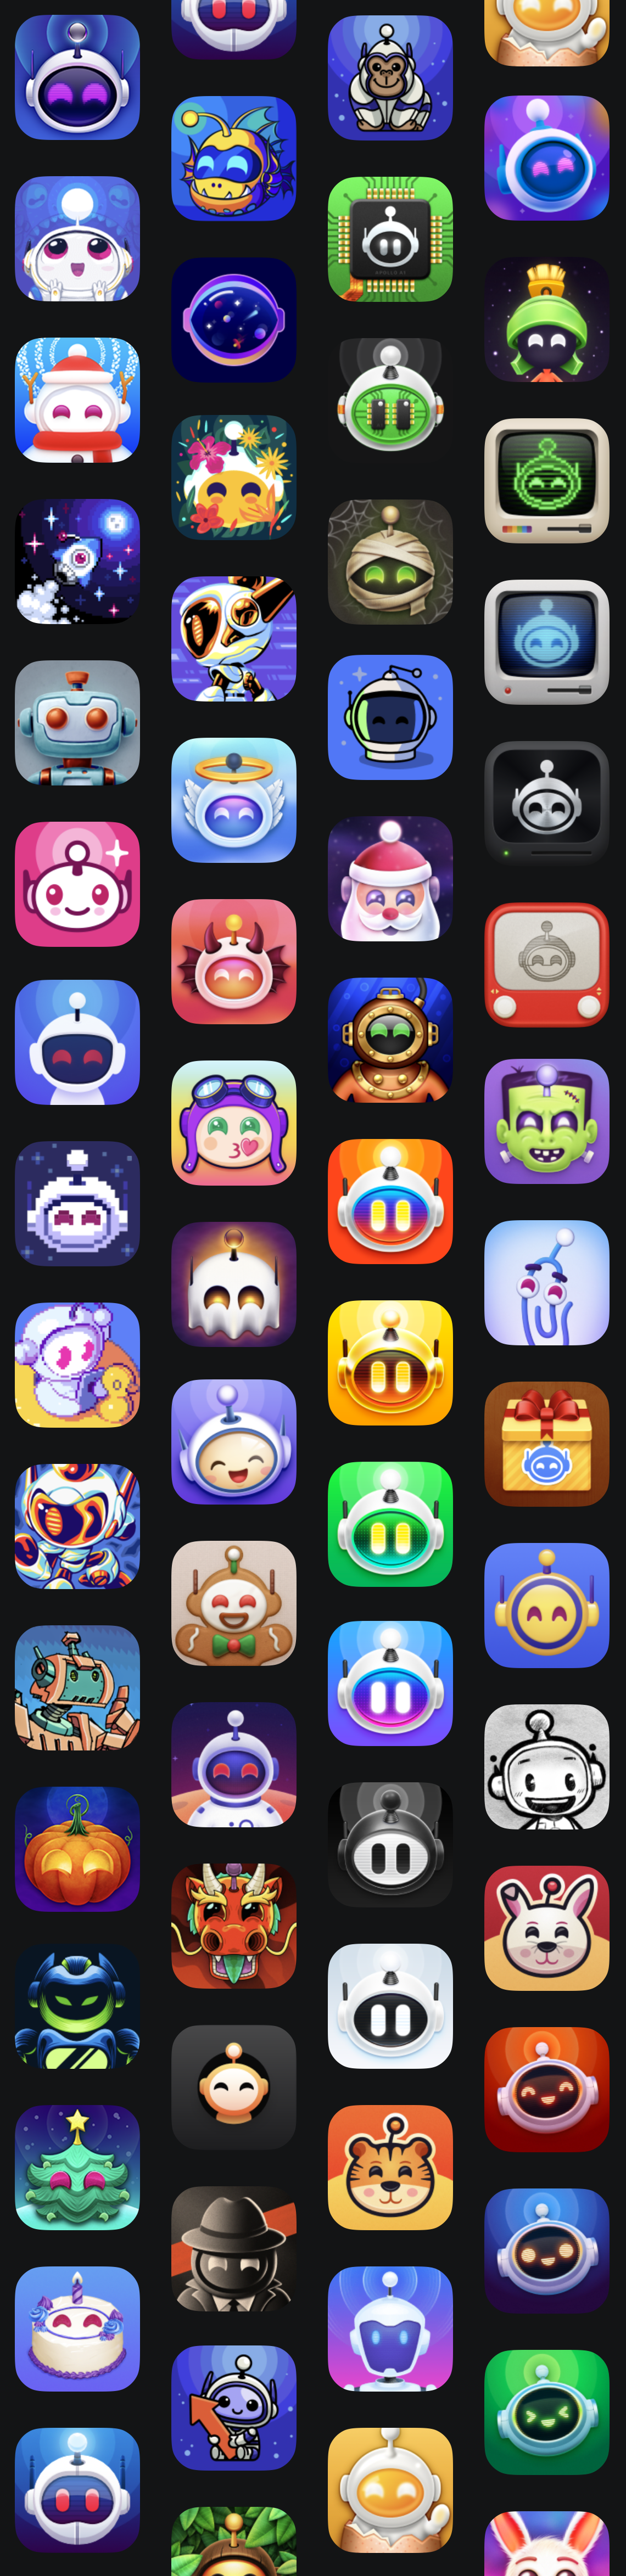 Screenshot of the ultra app icon variations from inside the “Apollo” app.